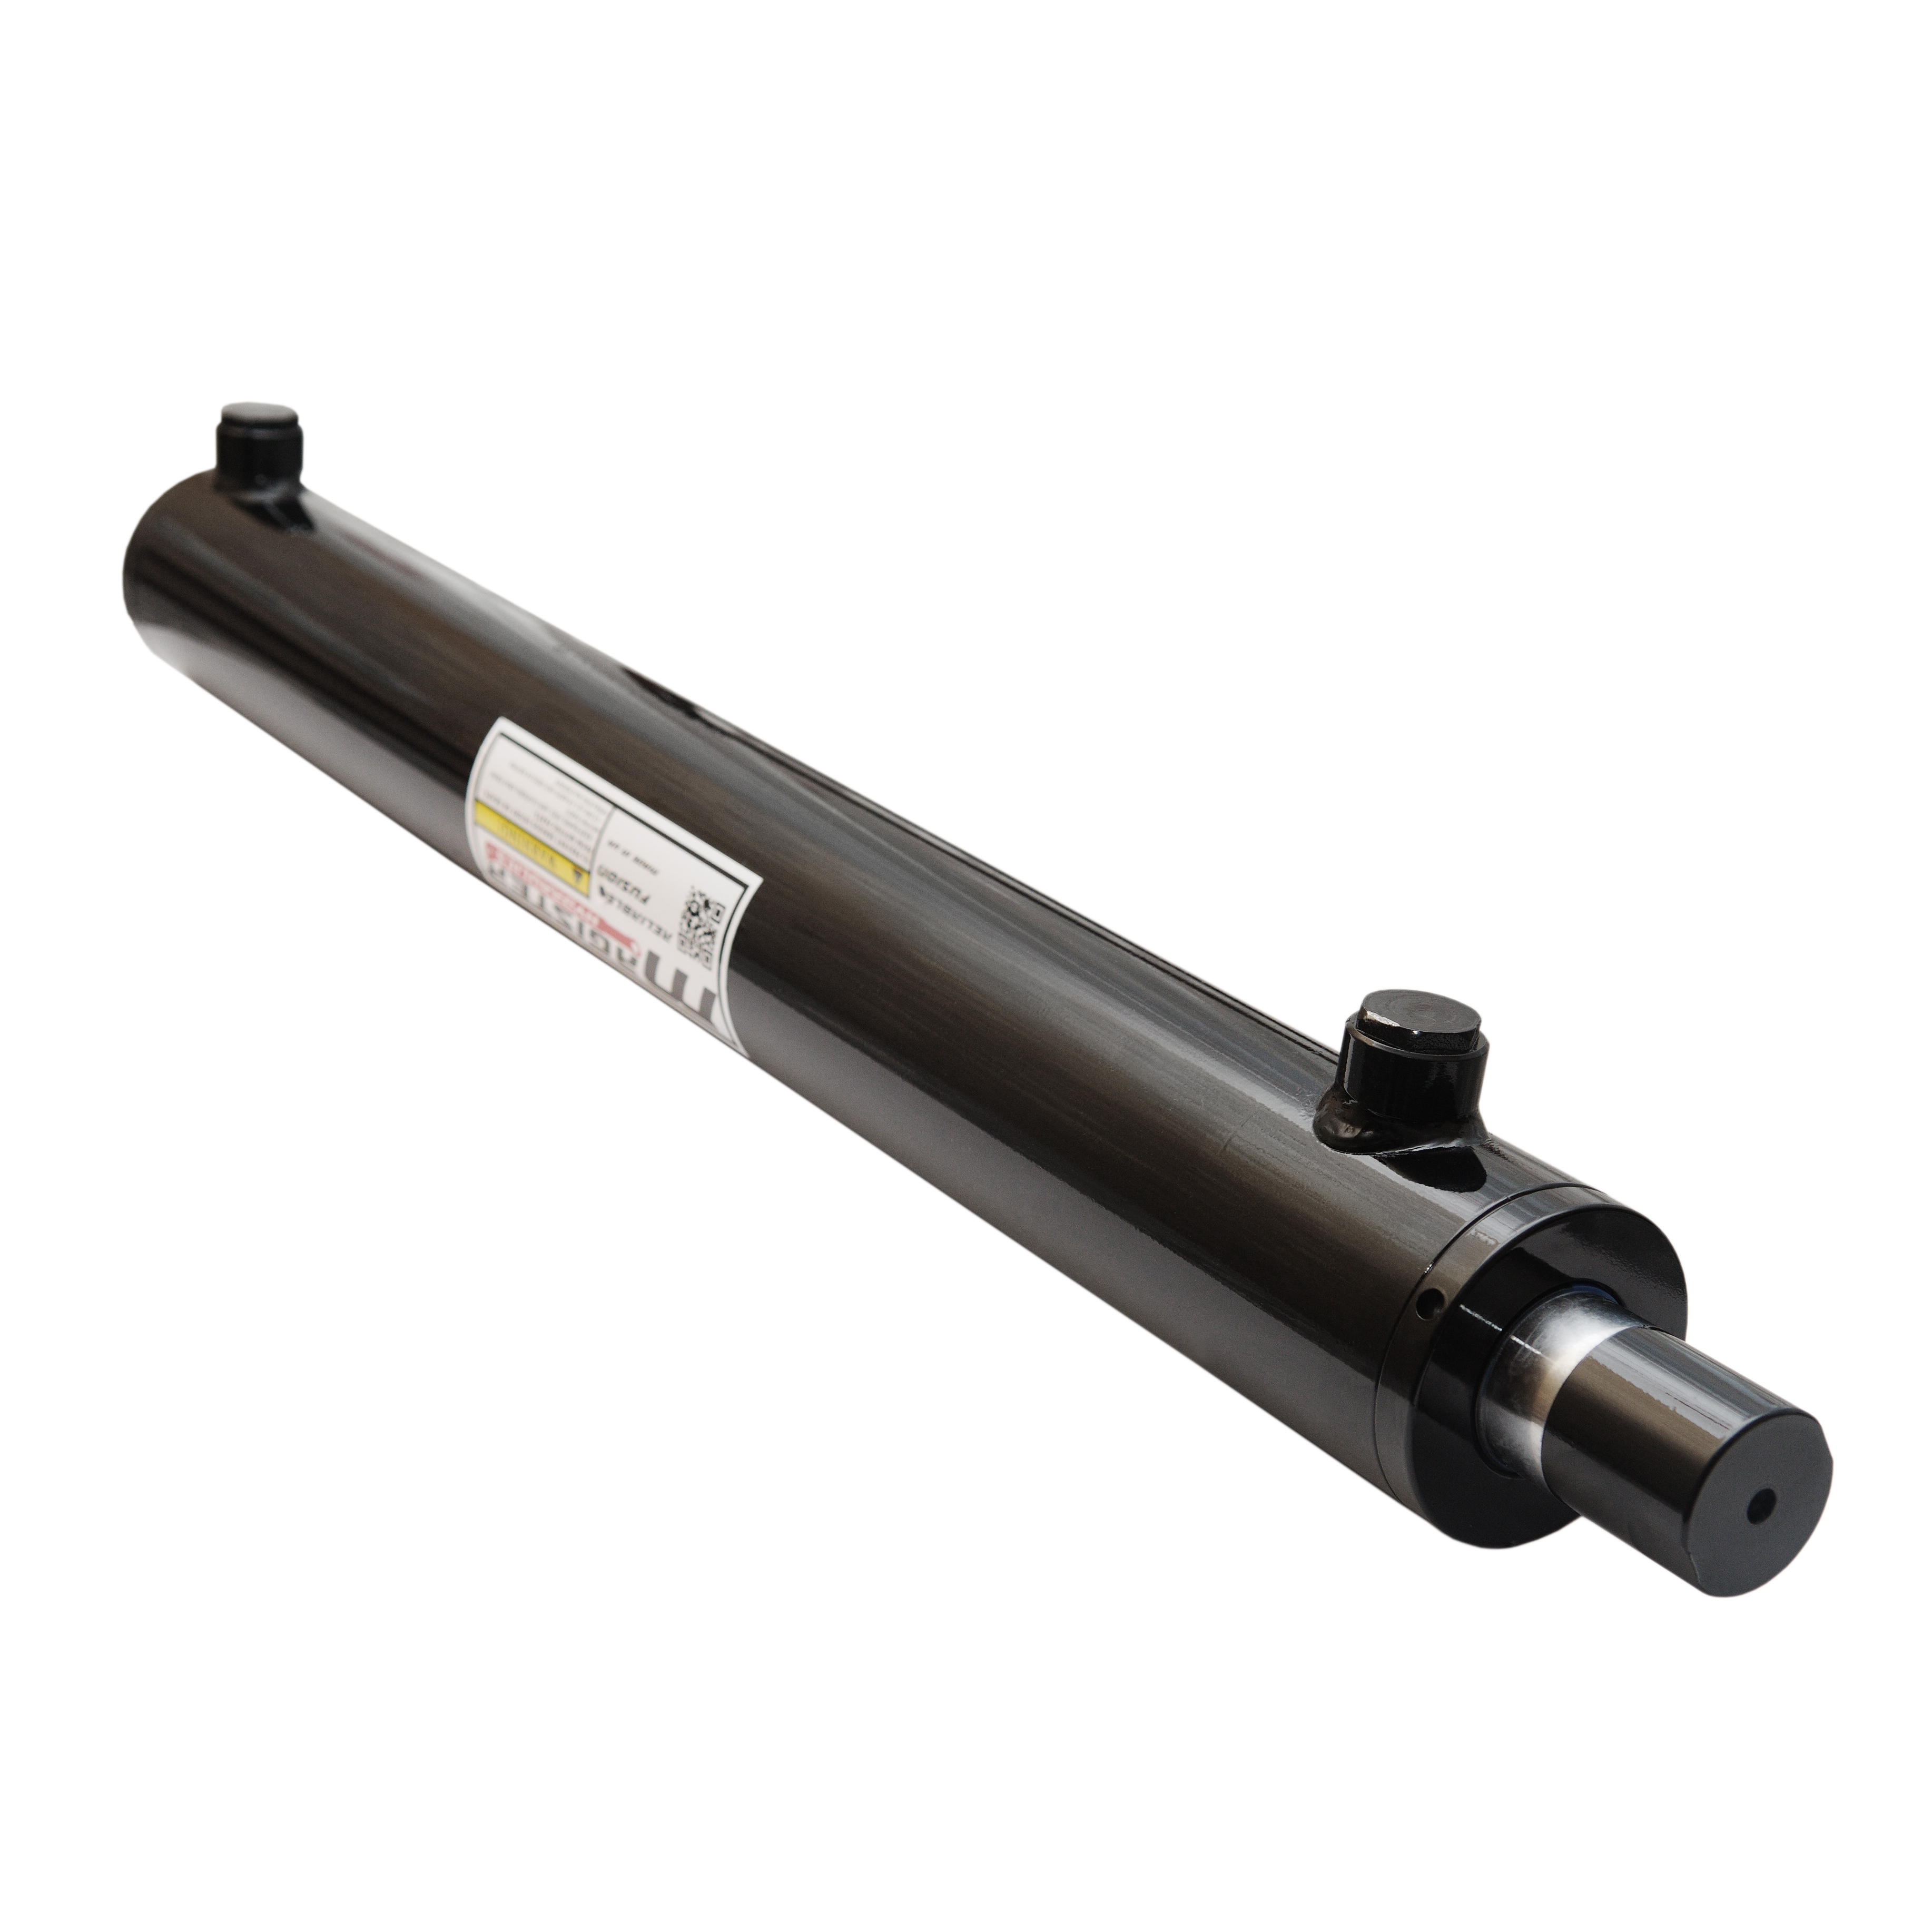 2.5 bore x 15 stroke hydraulic cylinder, welded universal double acting cylinder | Magister Hydraulics